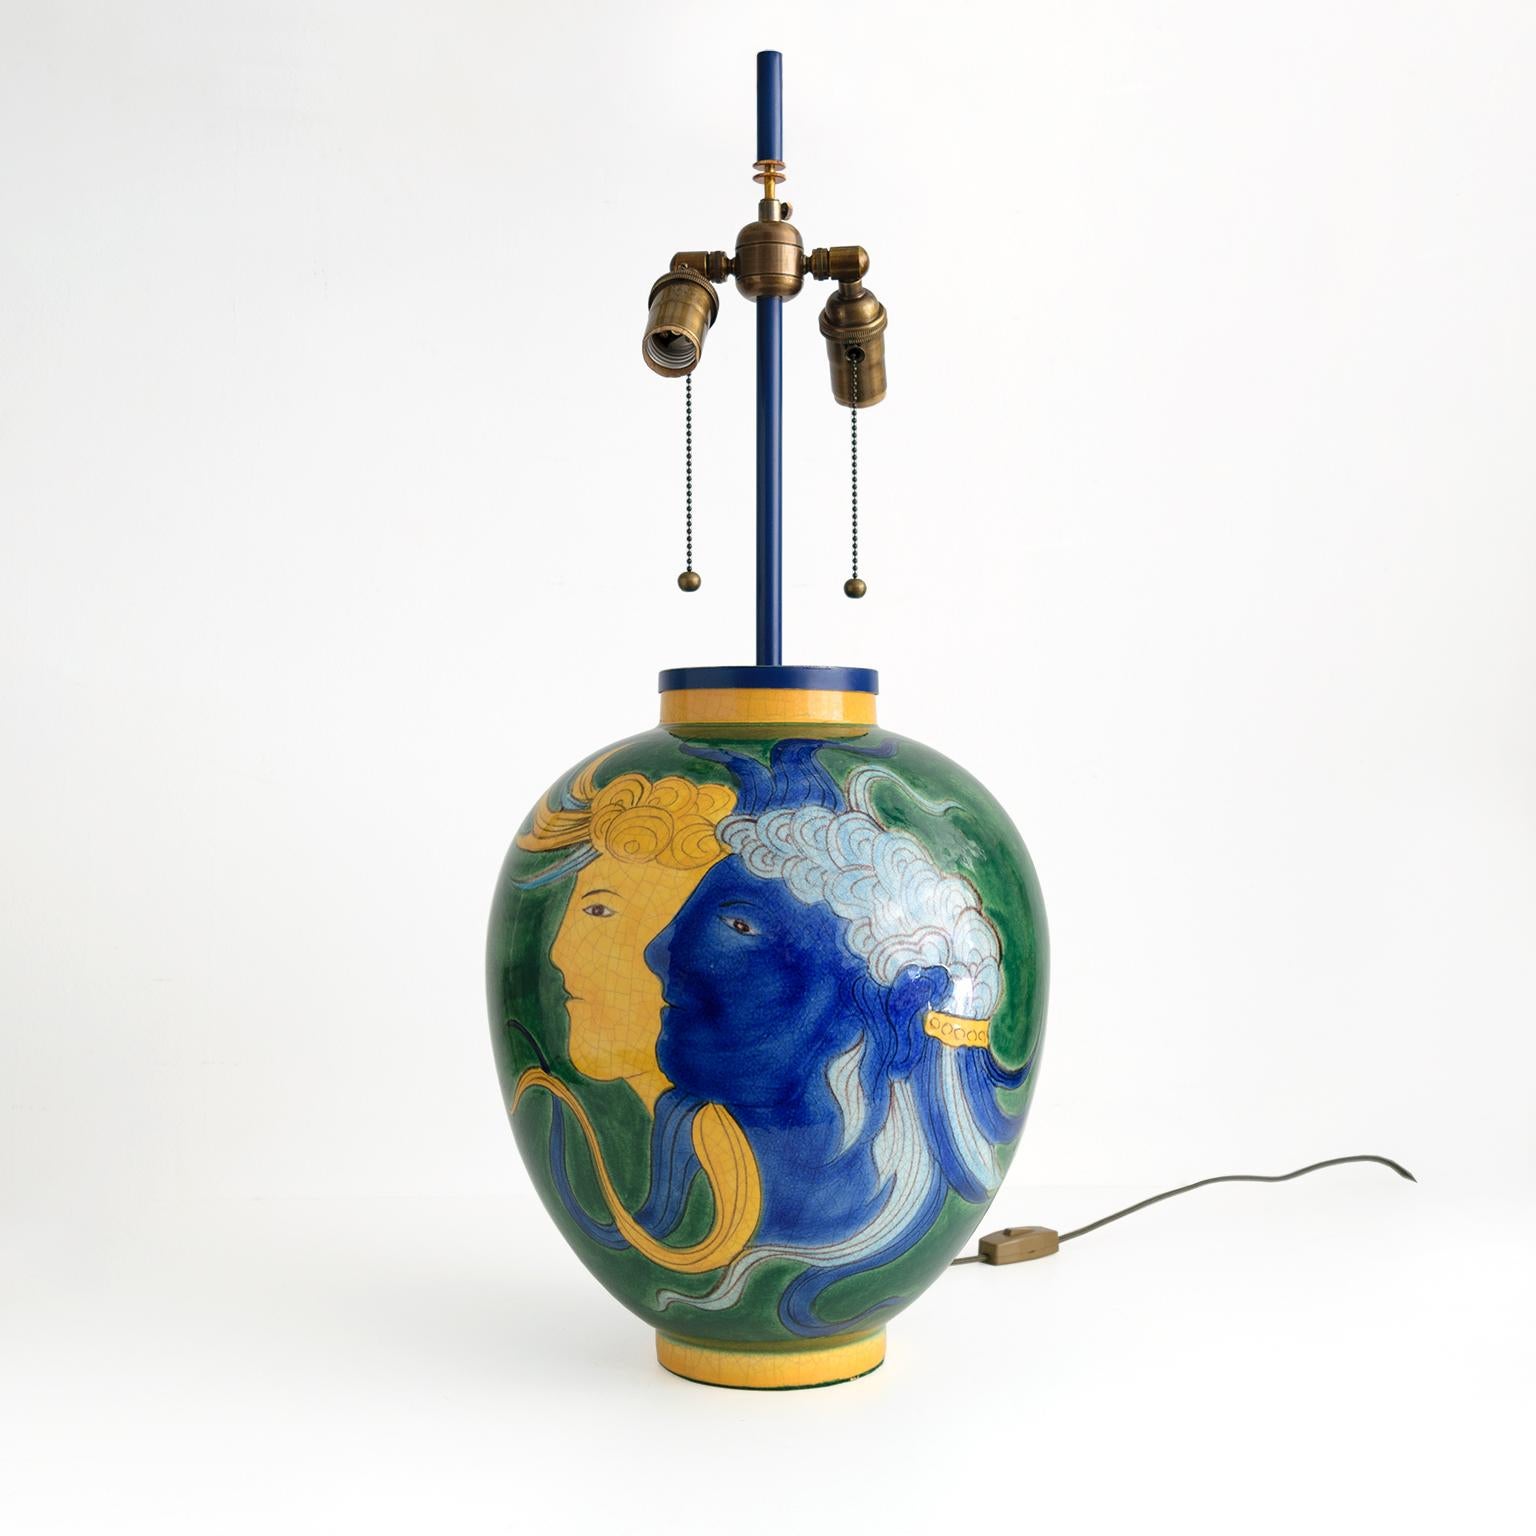 Large, Louis Drimmer ceramic table lamp with a blue and yellow face on a green glazed ground. Newly wired with patinated brass, standard base double cluster sockets. Stem, finial and mounting are custom brass stained in blue, Made in France, 1970.